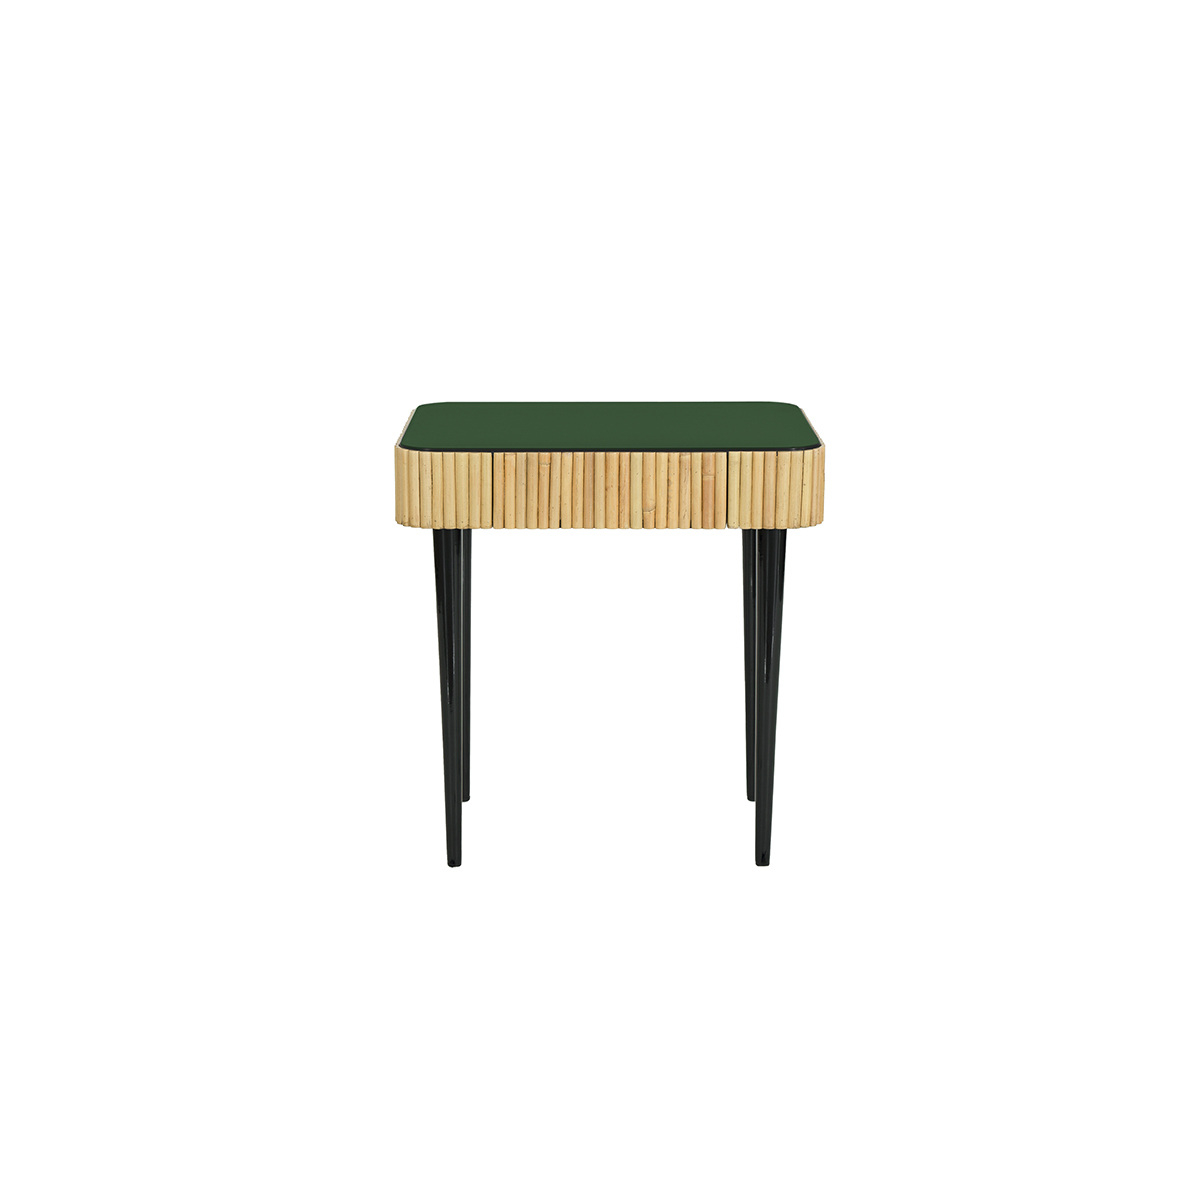 Bedside Table Riviera, Black Radish - H65 cm - Wicker / Lacquered wood - image 9